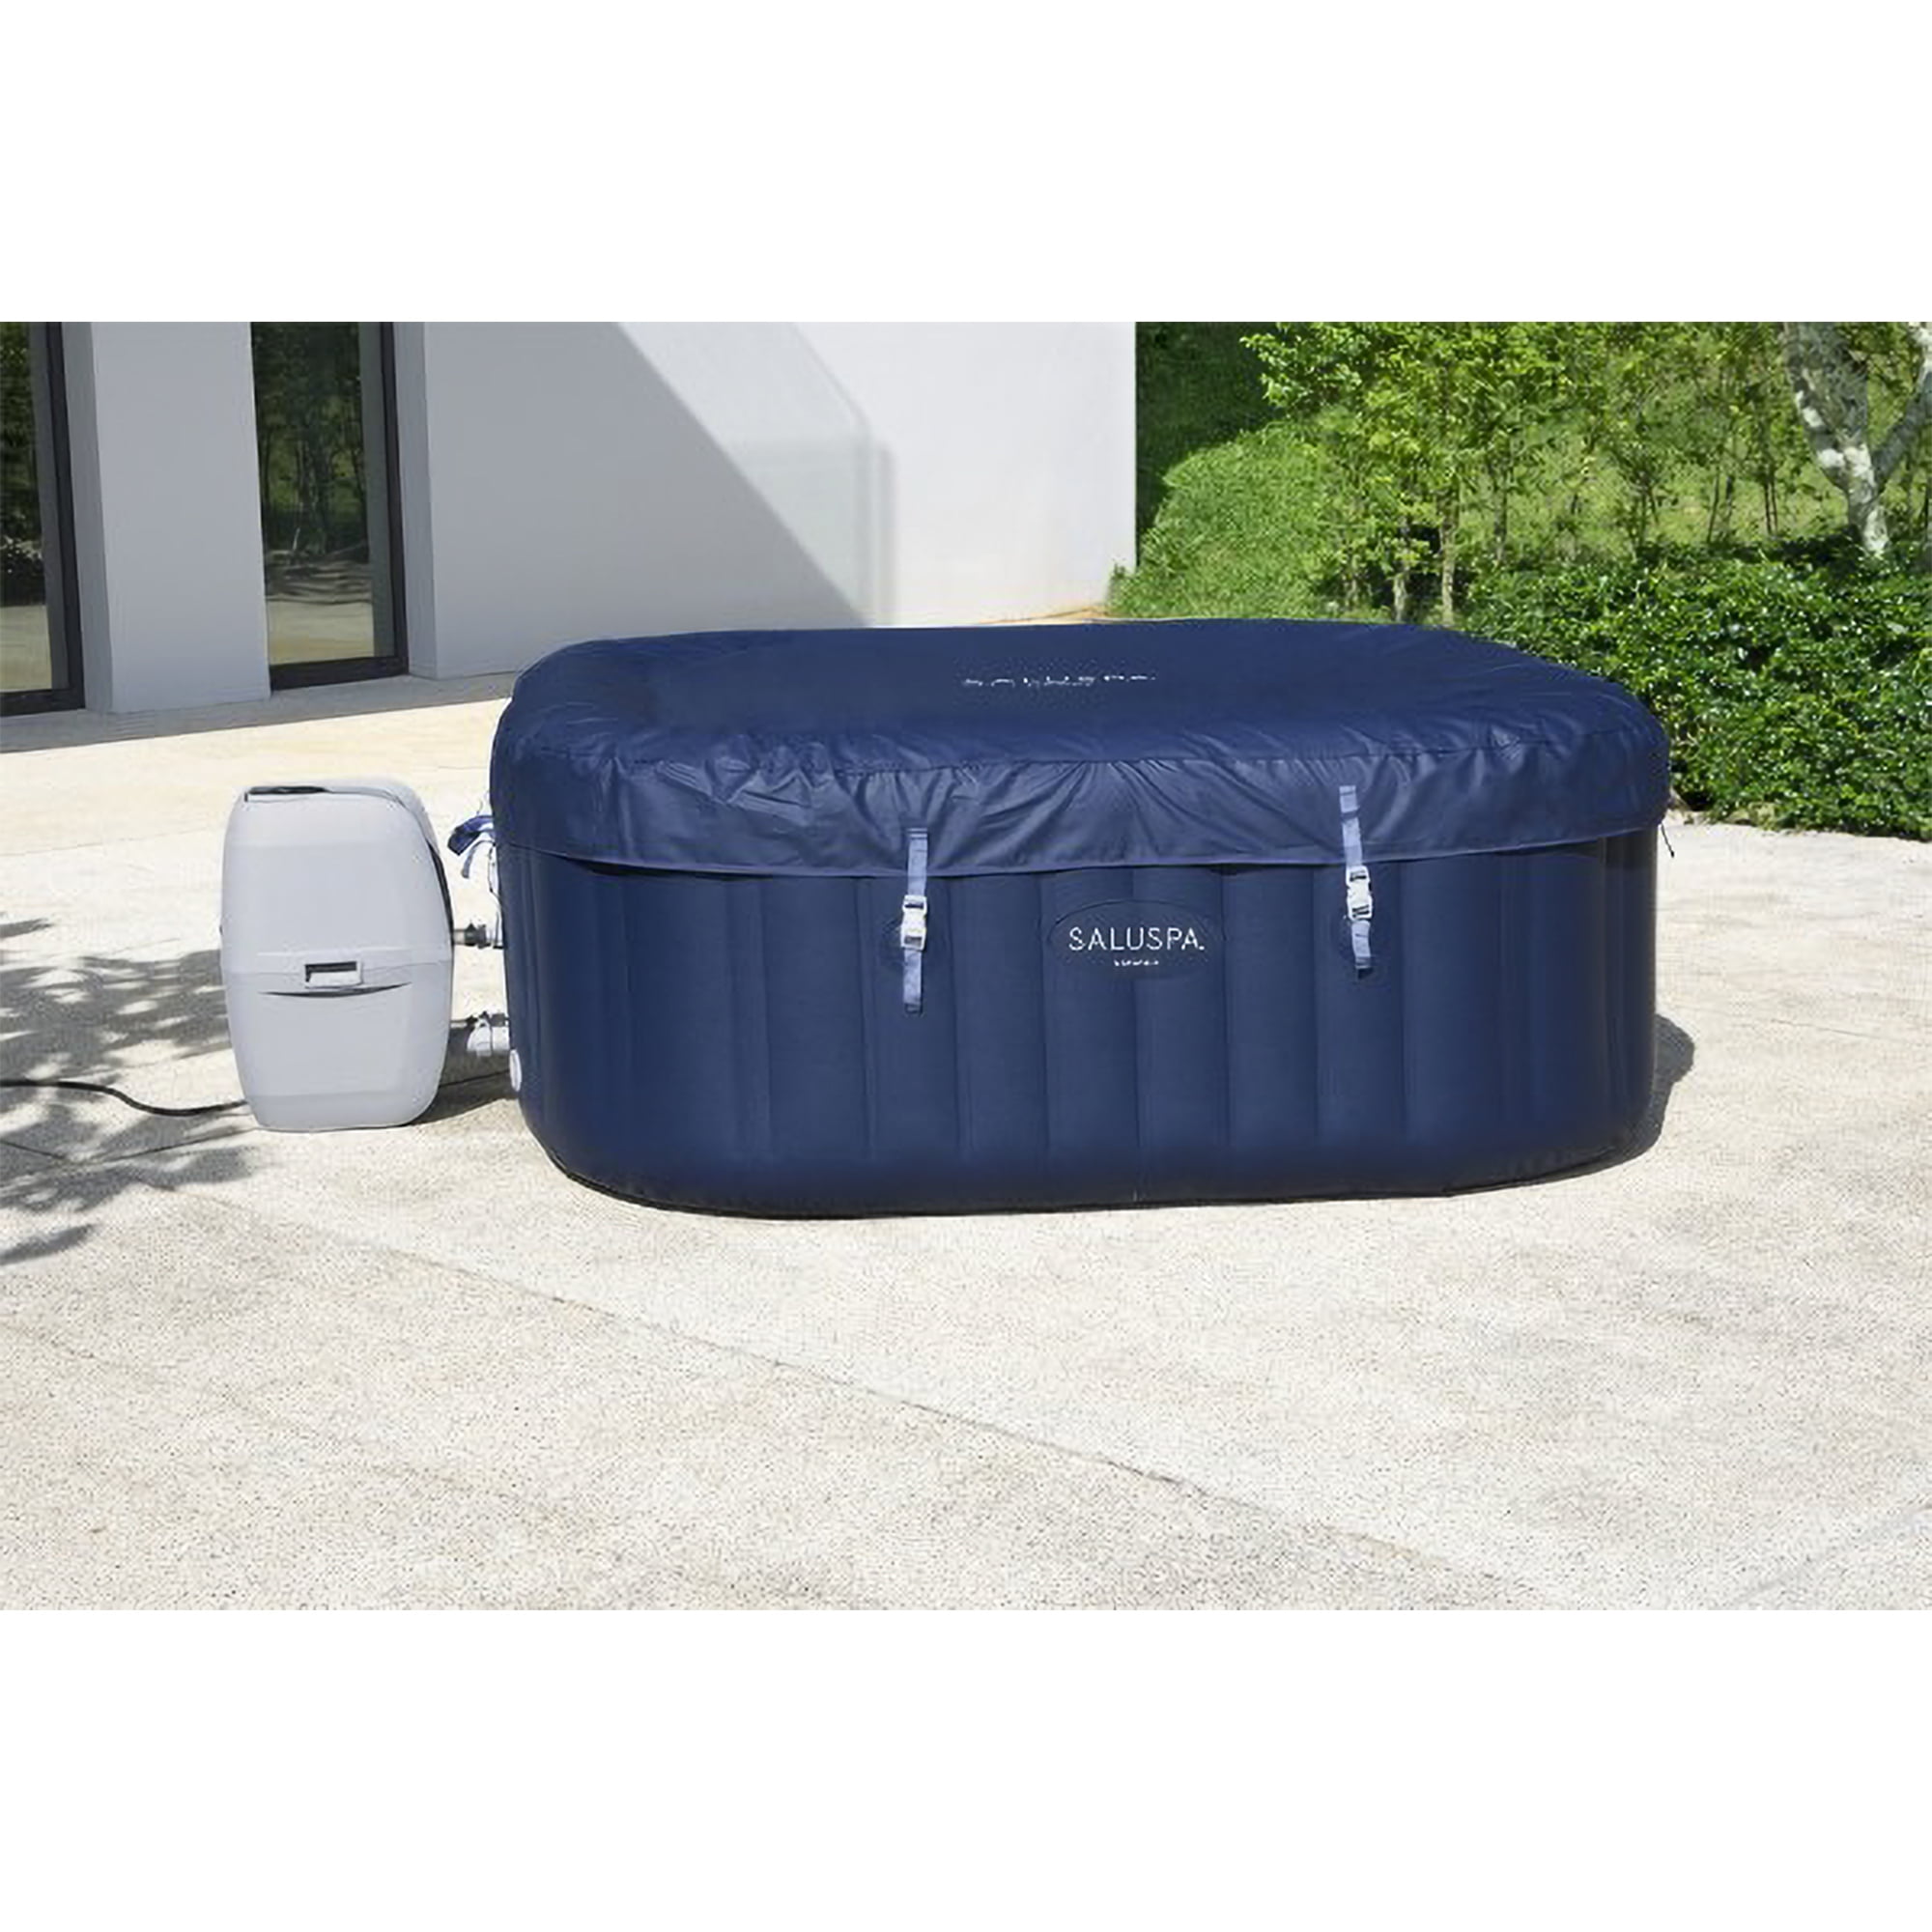 SaluSpa Hawaii with AirJet Blue 114 Jets, Hot Bestway Tub Inflatable